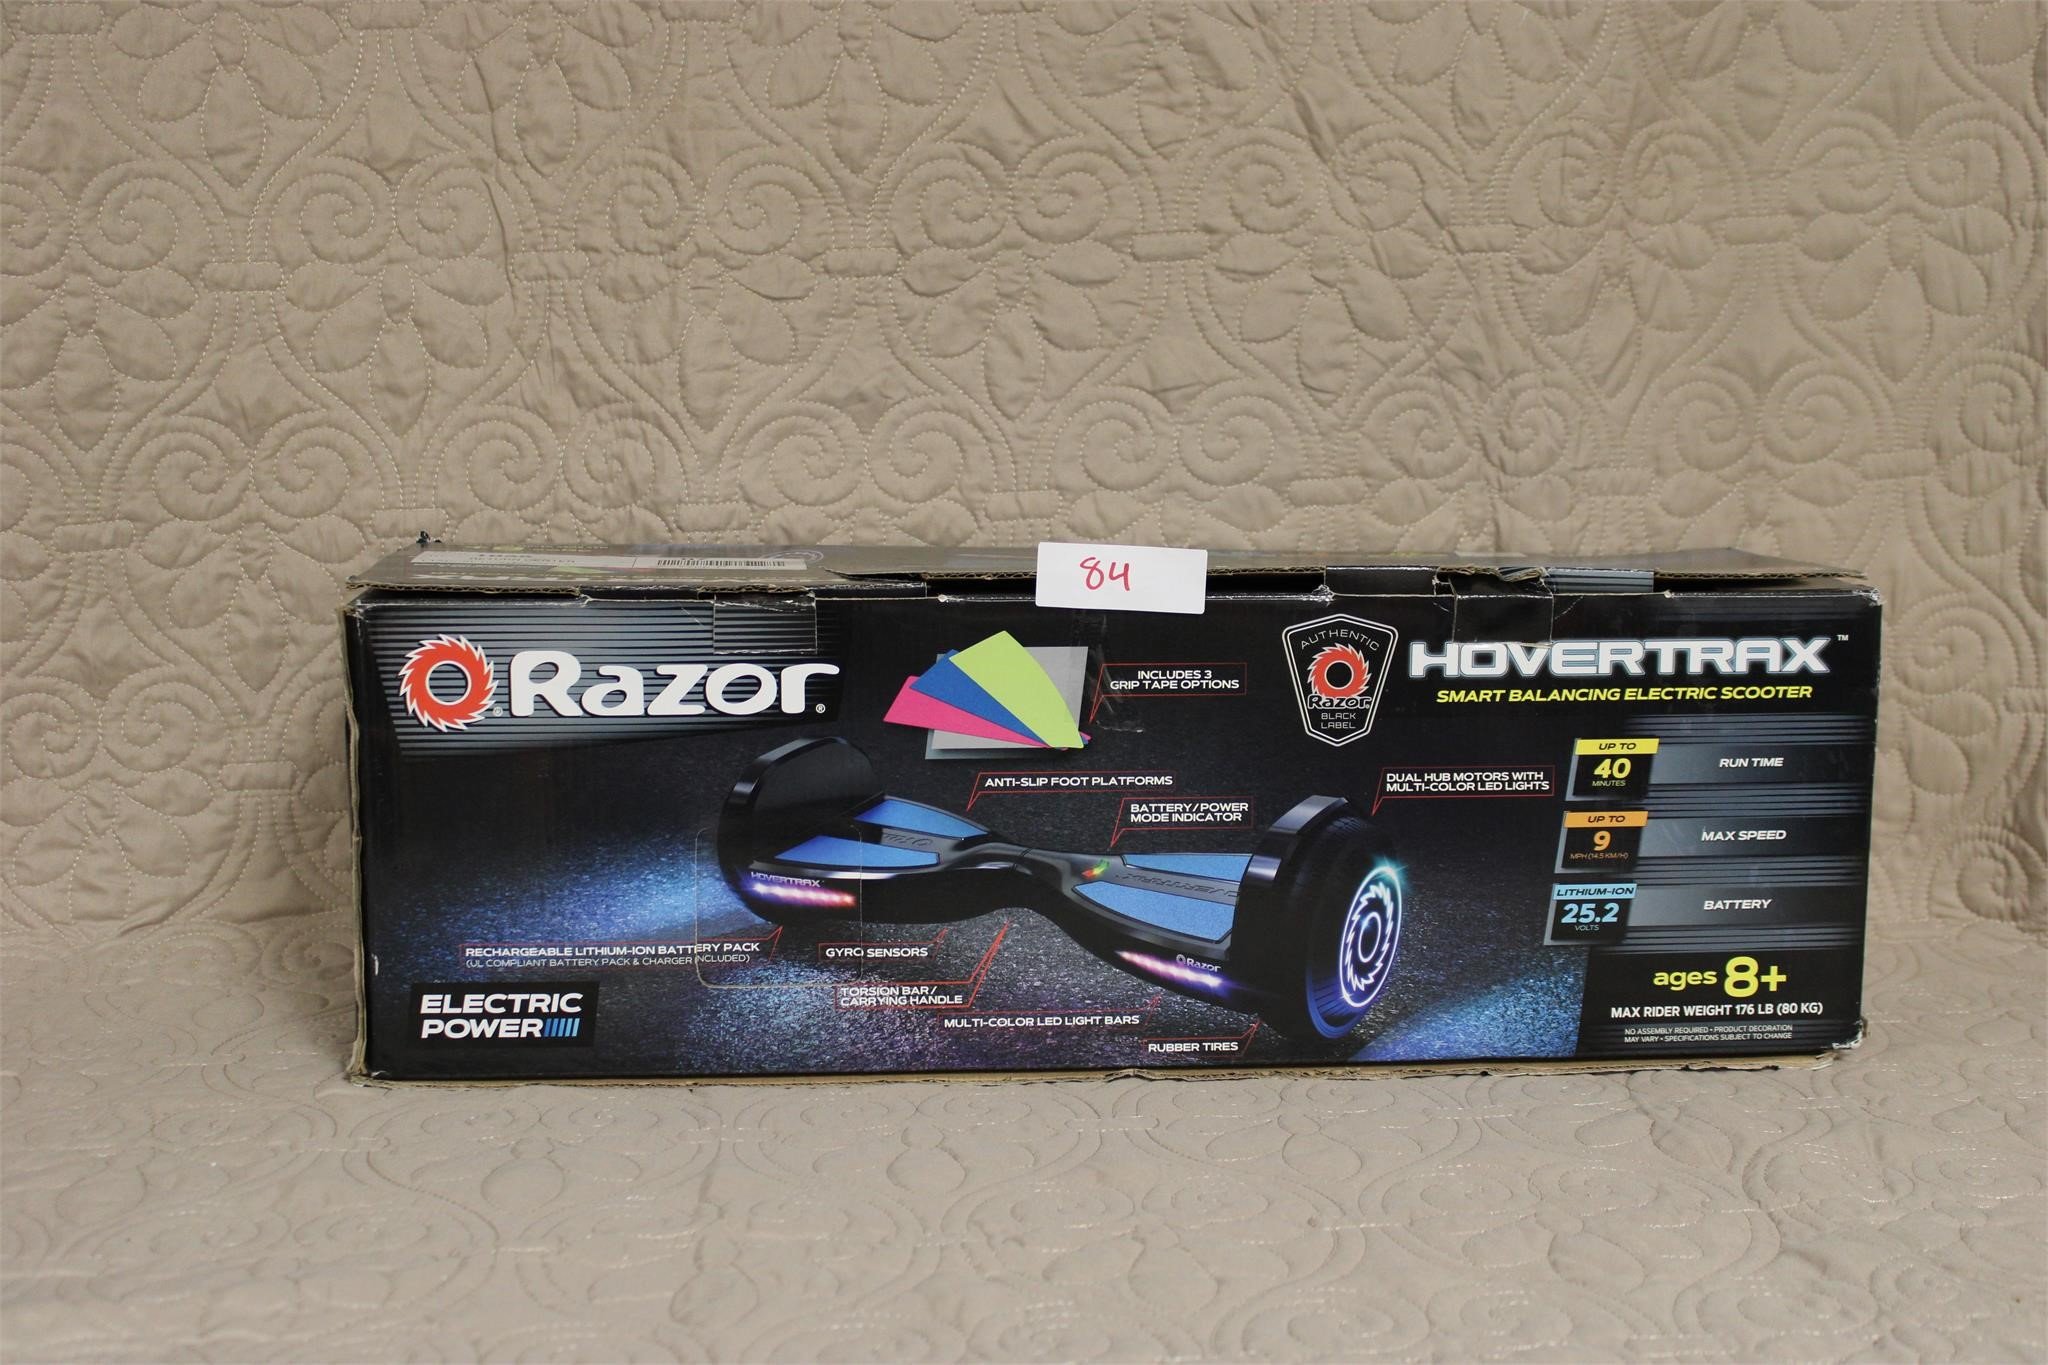 Razor Hovertrax Hoverboard(No Charger)